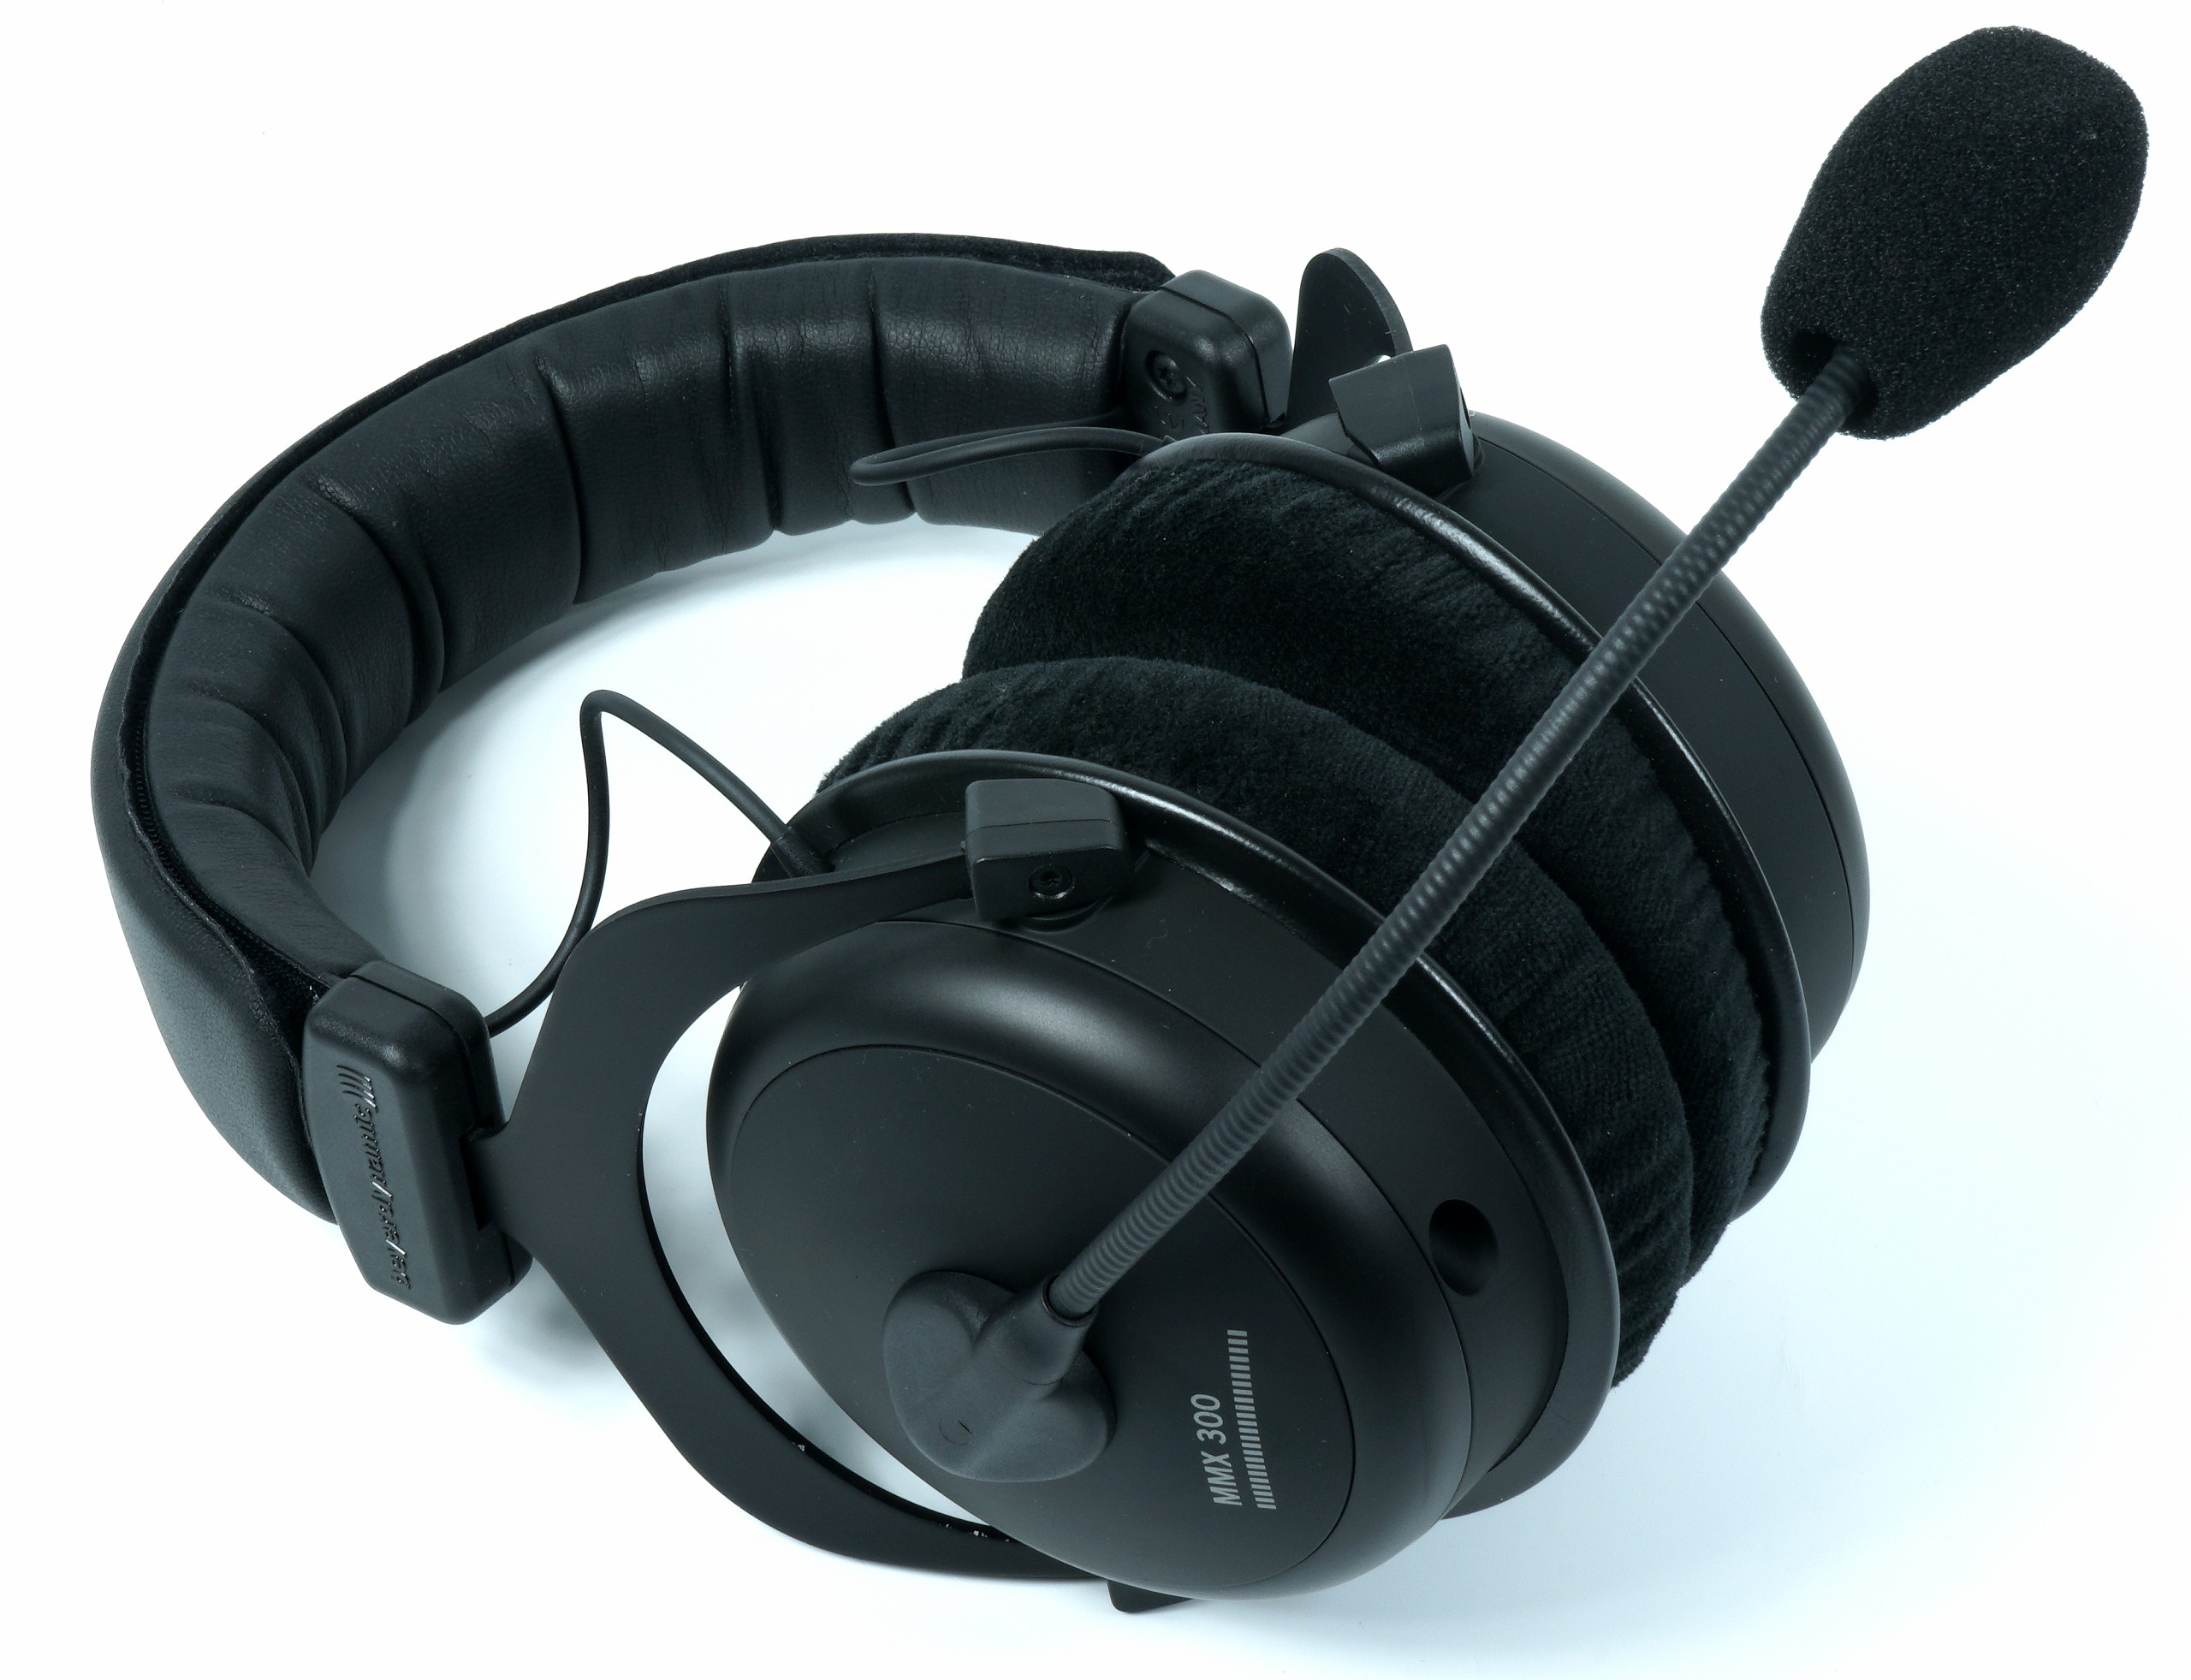 So must headset! Beyerdynamic MMX 300 of the 2nd Generation in